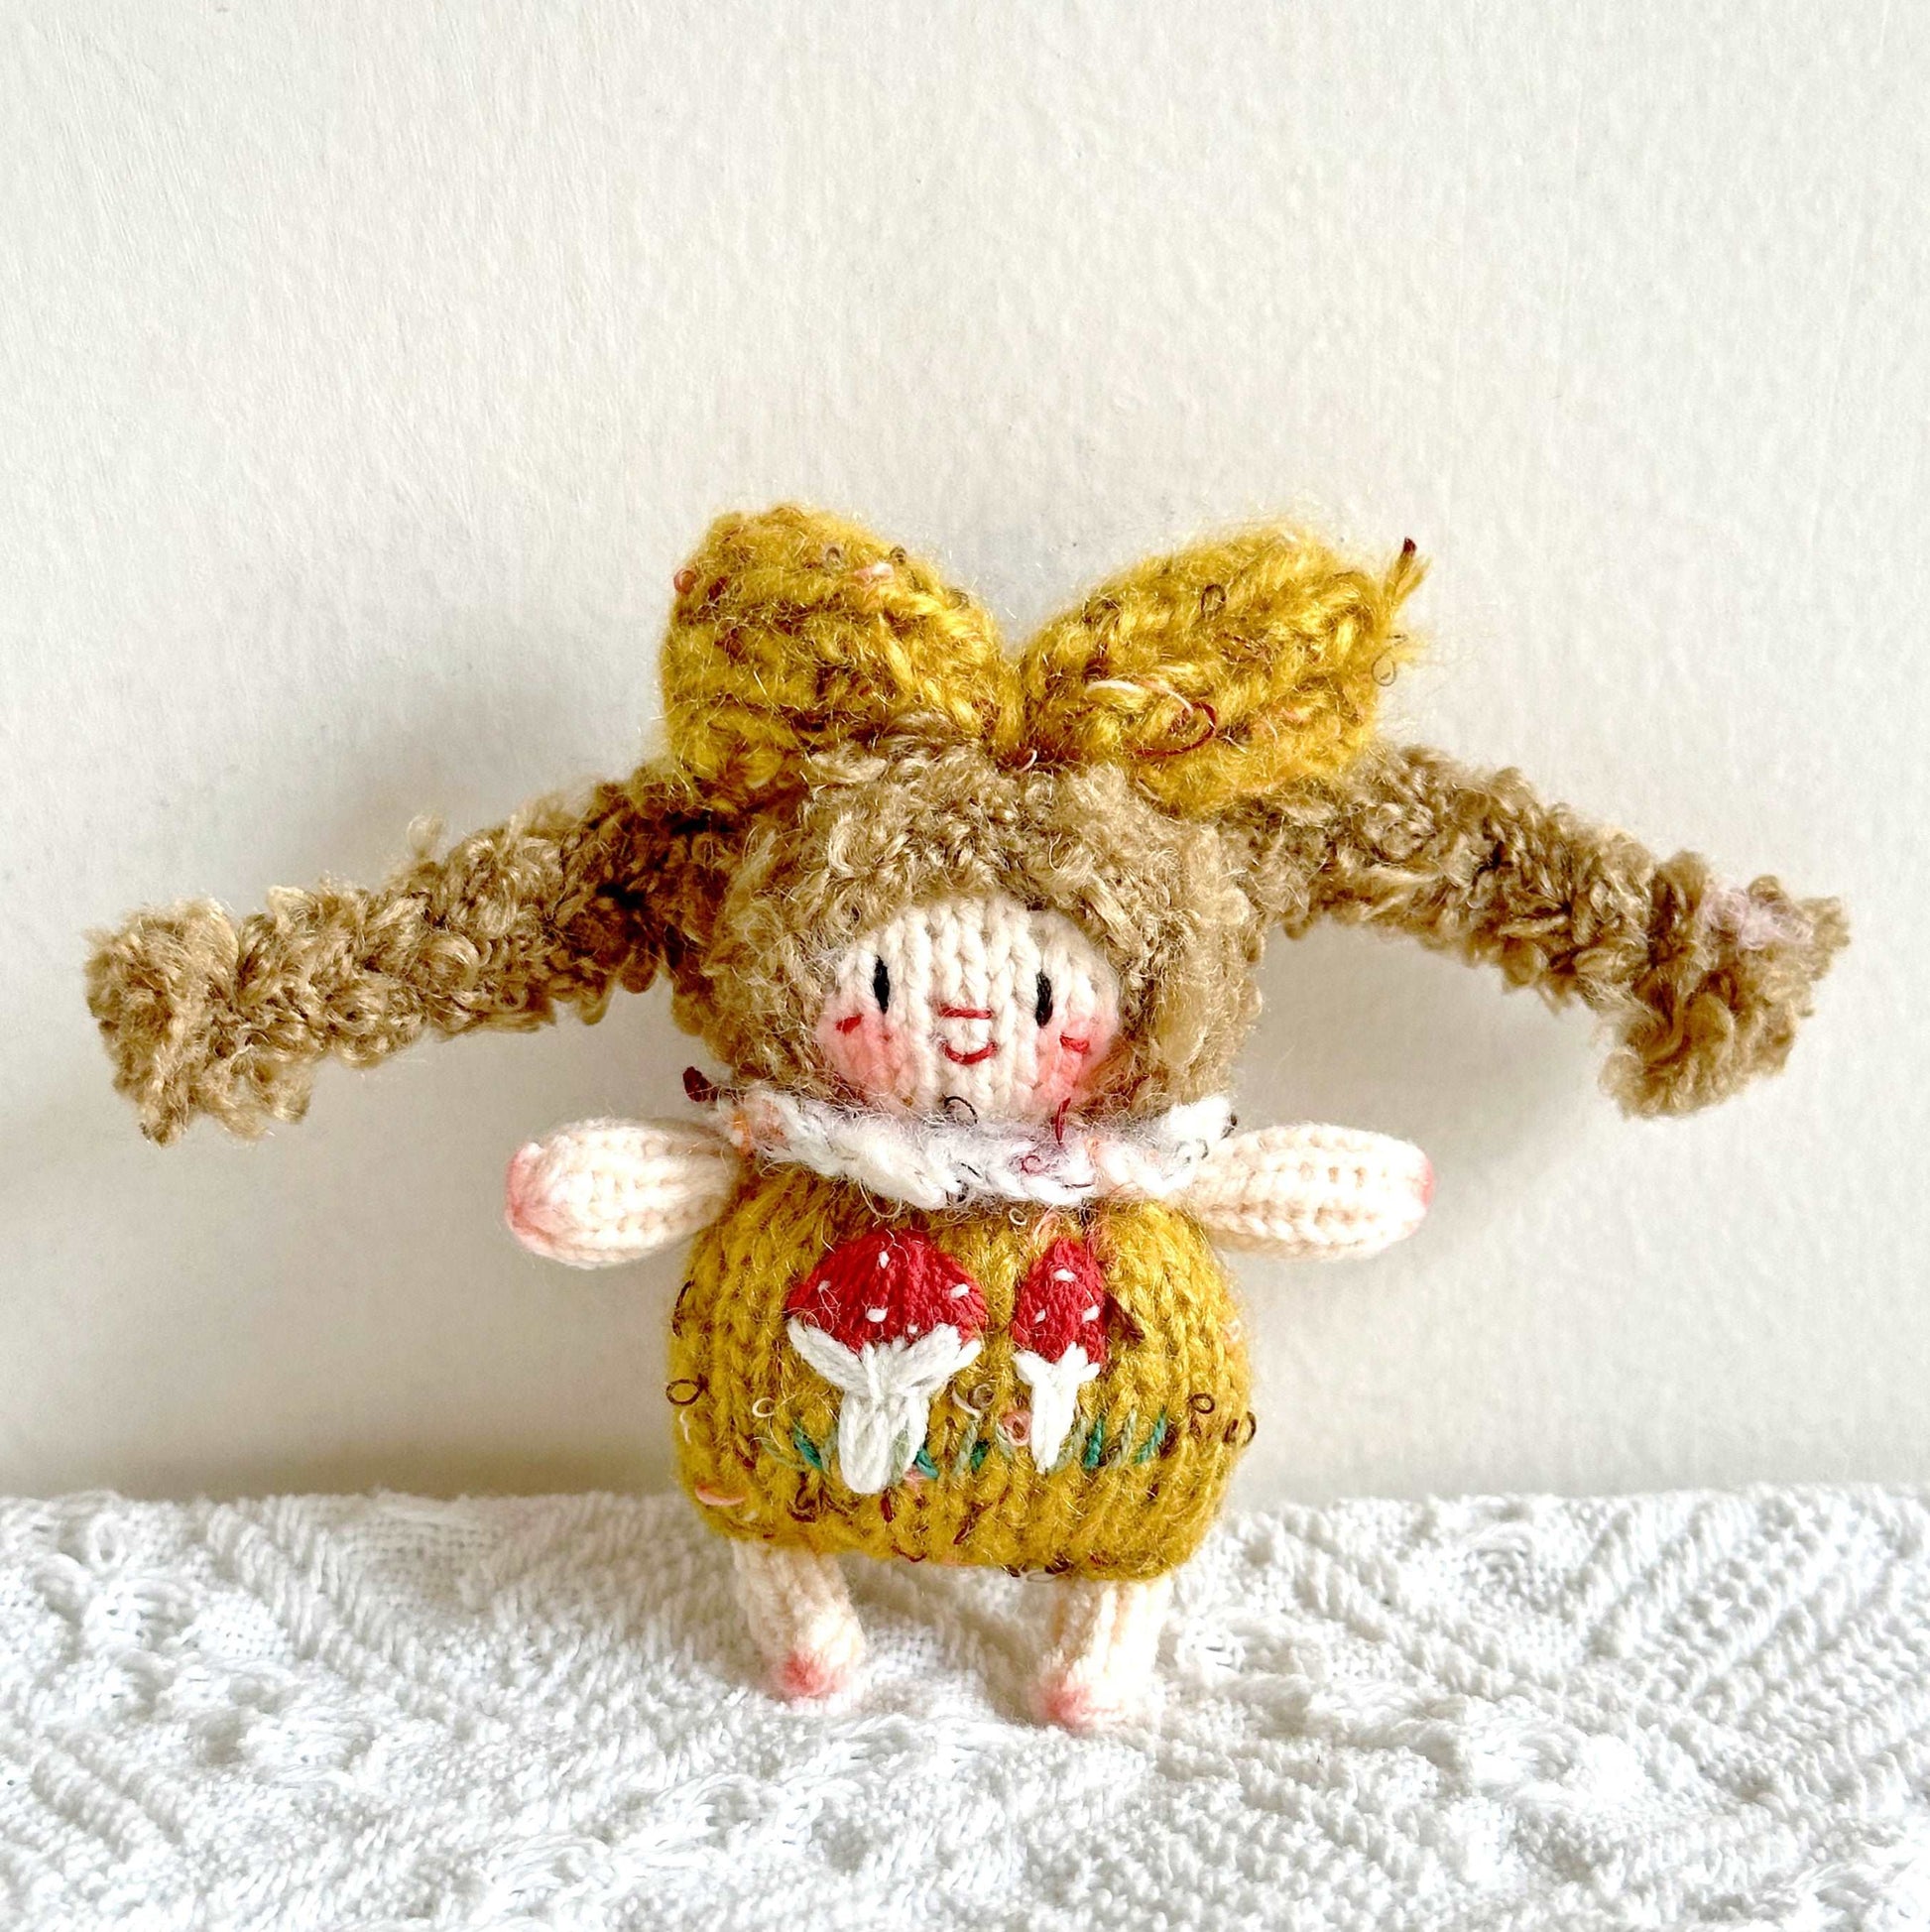 Handcrafted Crochet Girl Doll Ornament for Home Decor